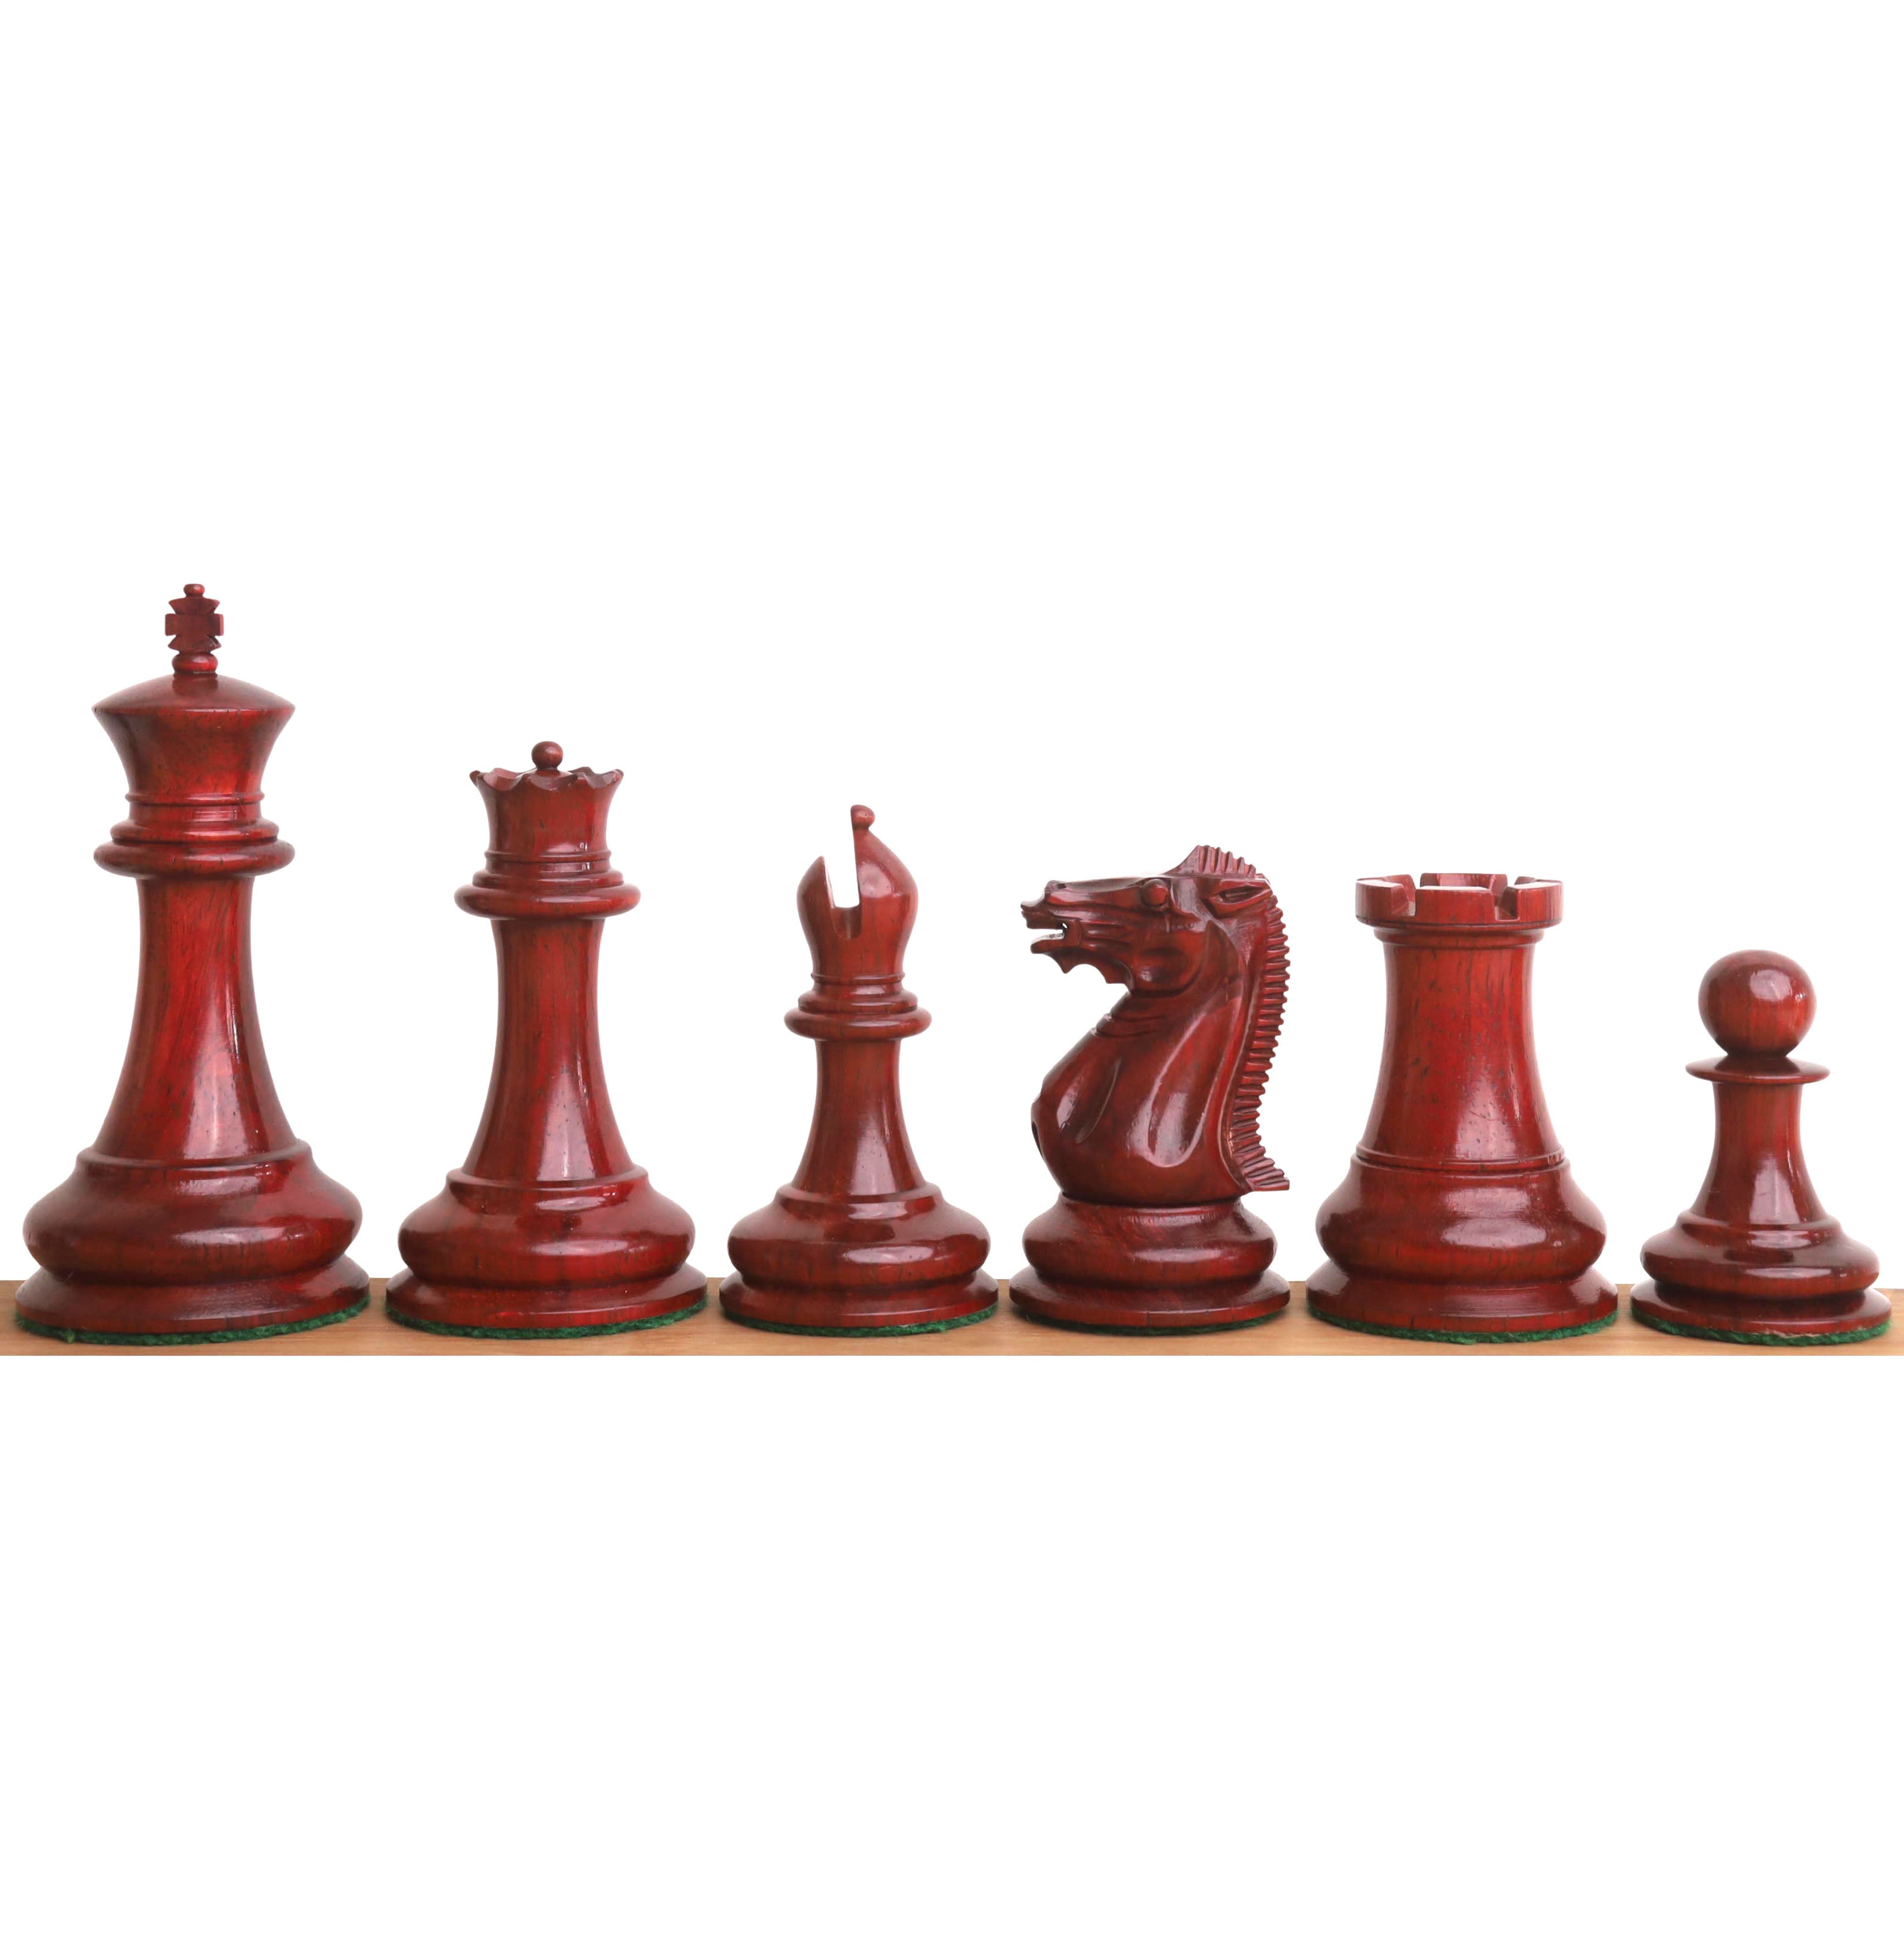 1849 Jacques Cook Staunton Collectors Chess Set- Chess Pieces Only- Bud Rosewood - 3.75"